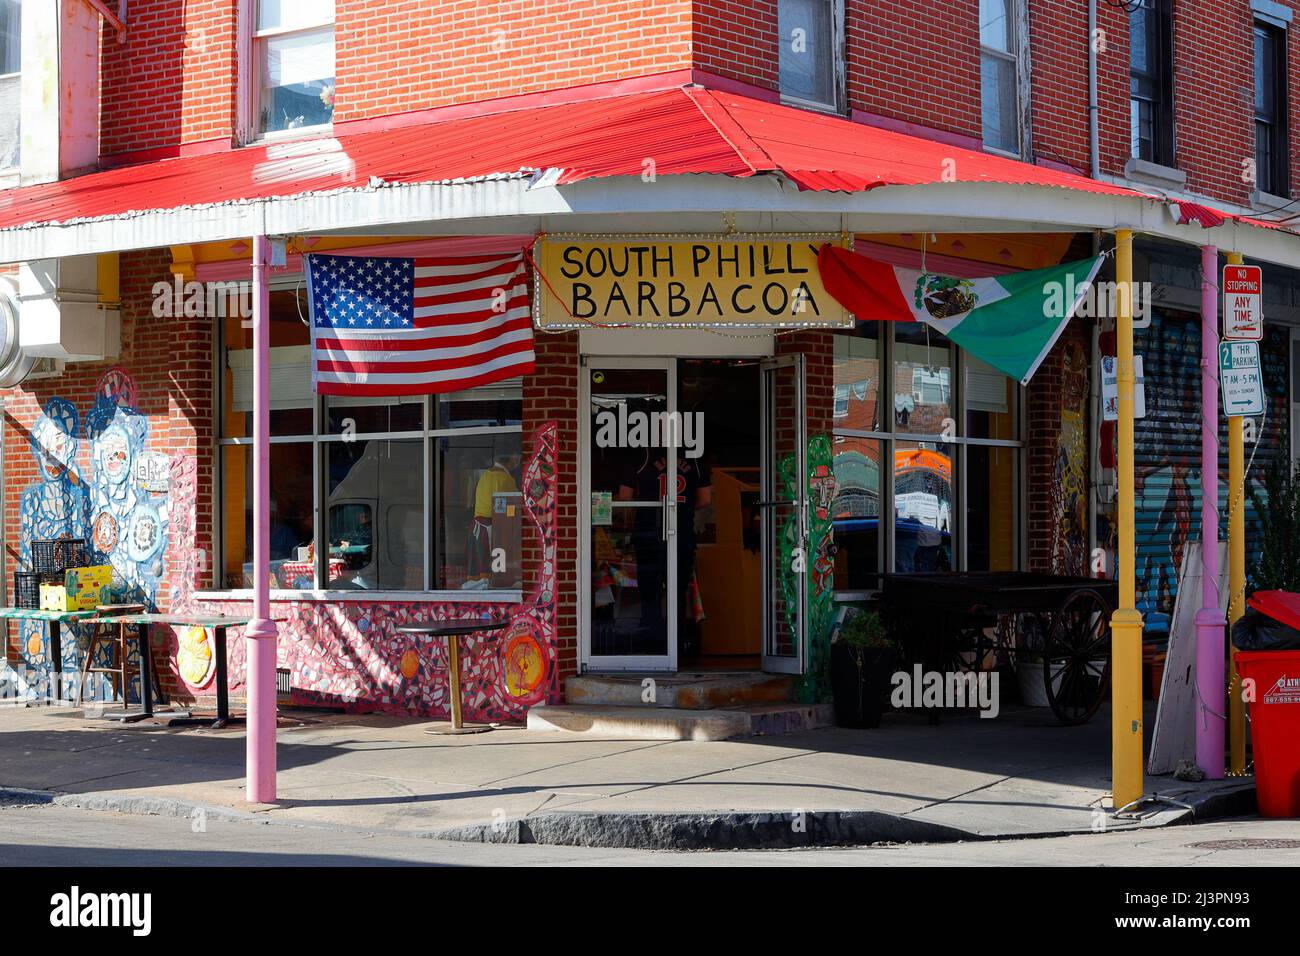 South Philly Barbacoa, 1140 S 9th St, Philadelphia storefront photo of a Mexican restaurant in the Italian Market. Pennsylvania Stock Photo